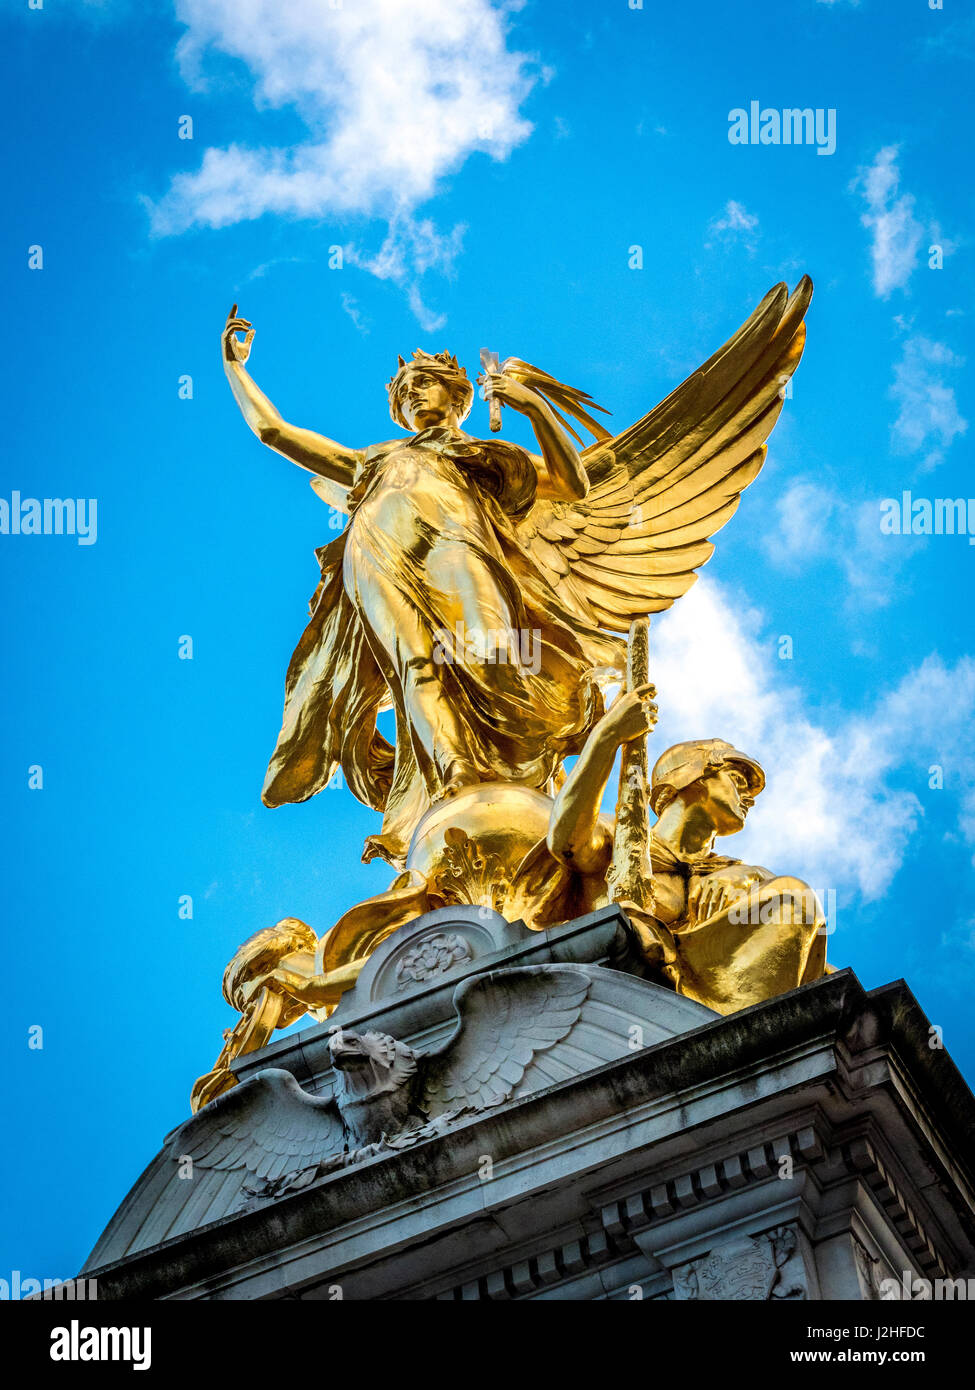 Gilded Winged Victory at the top of the Victoria Memorial, London, UK. Stock Photo